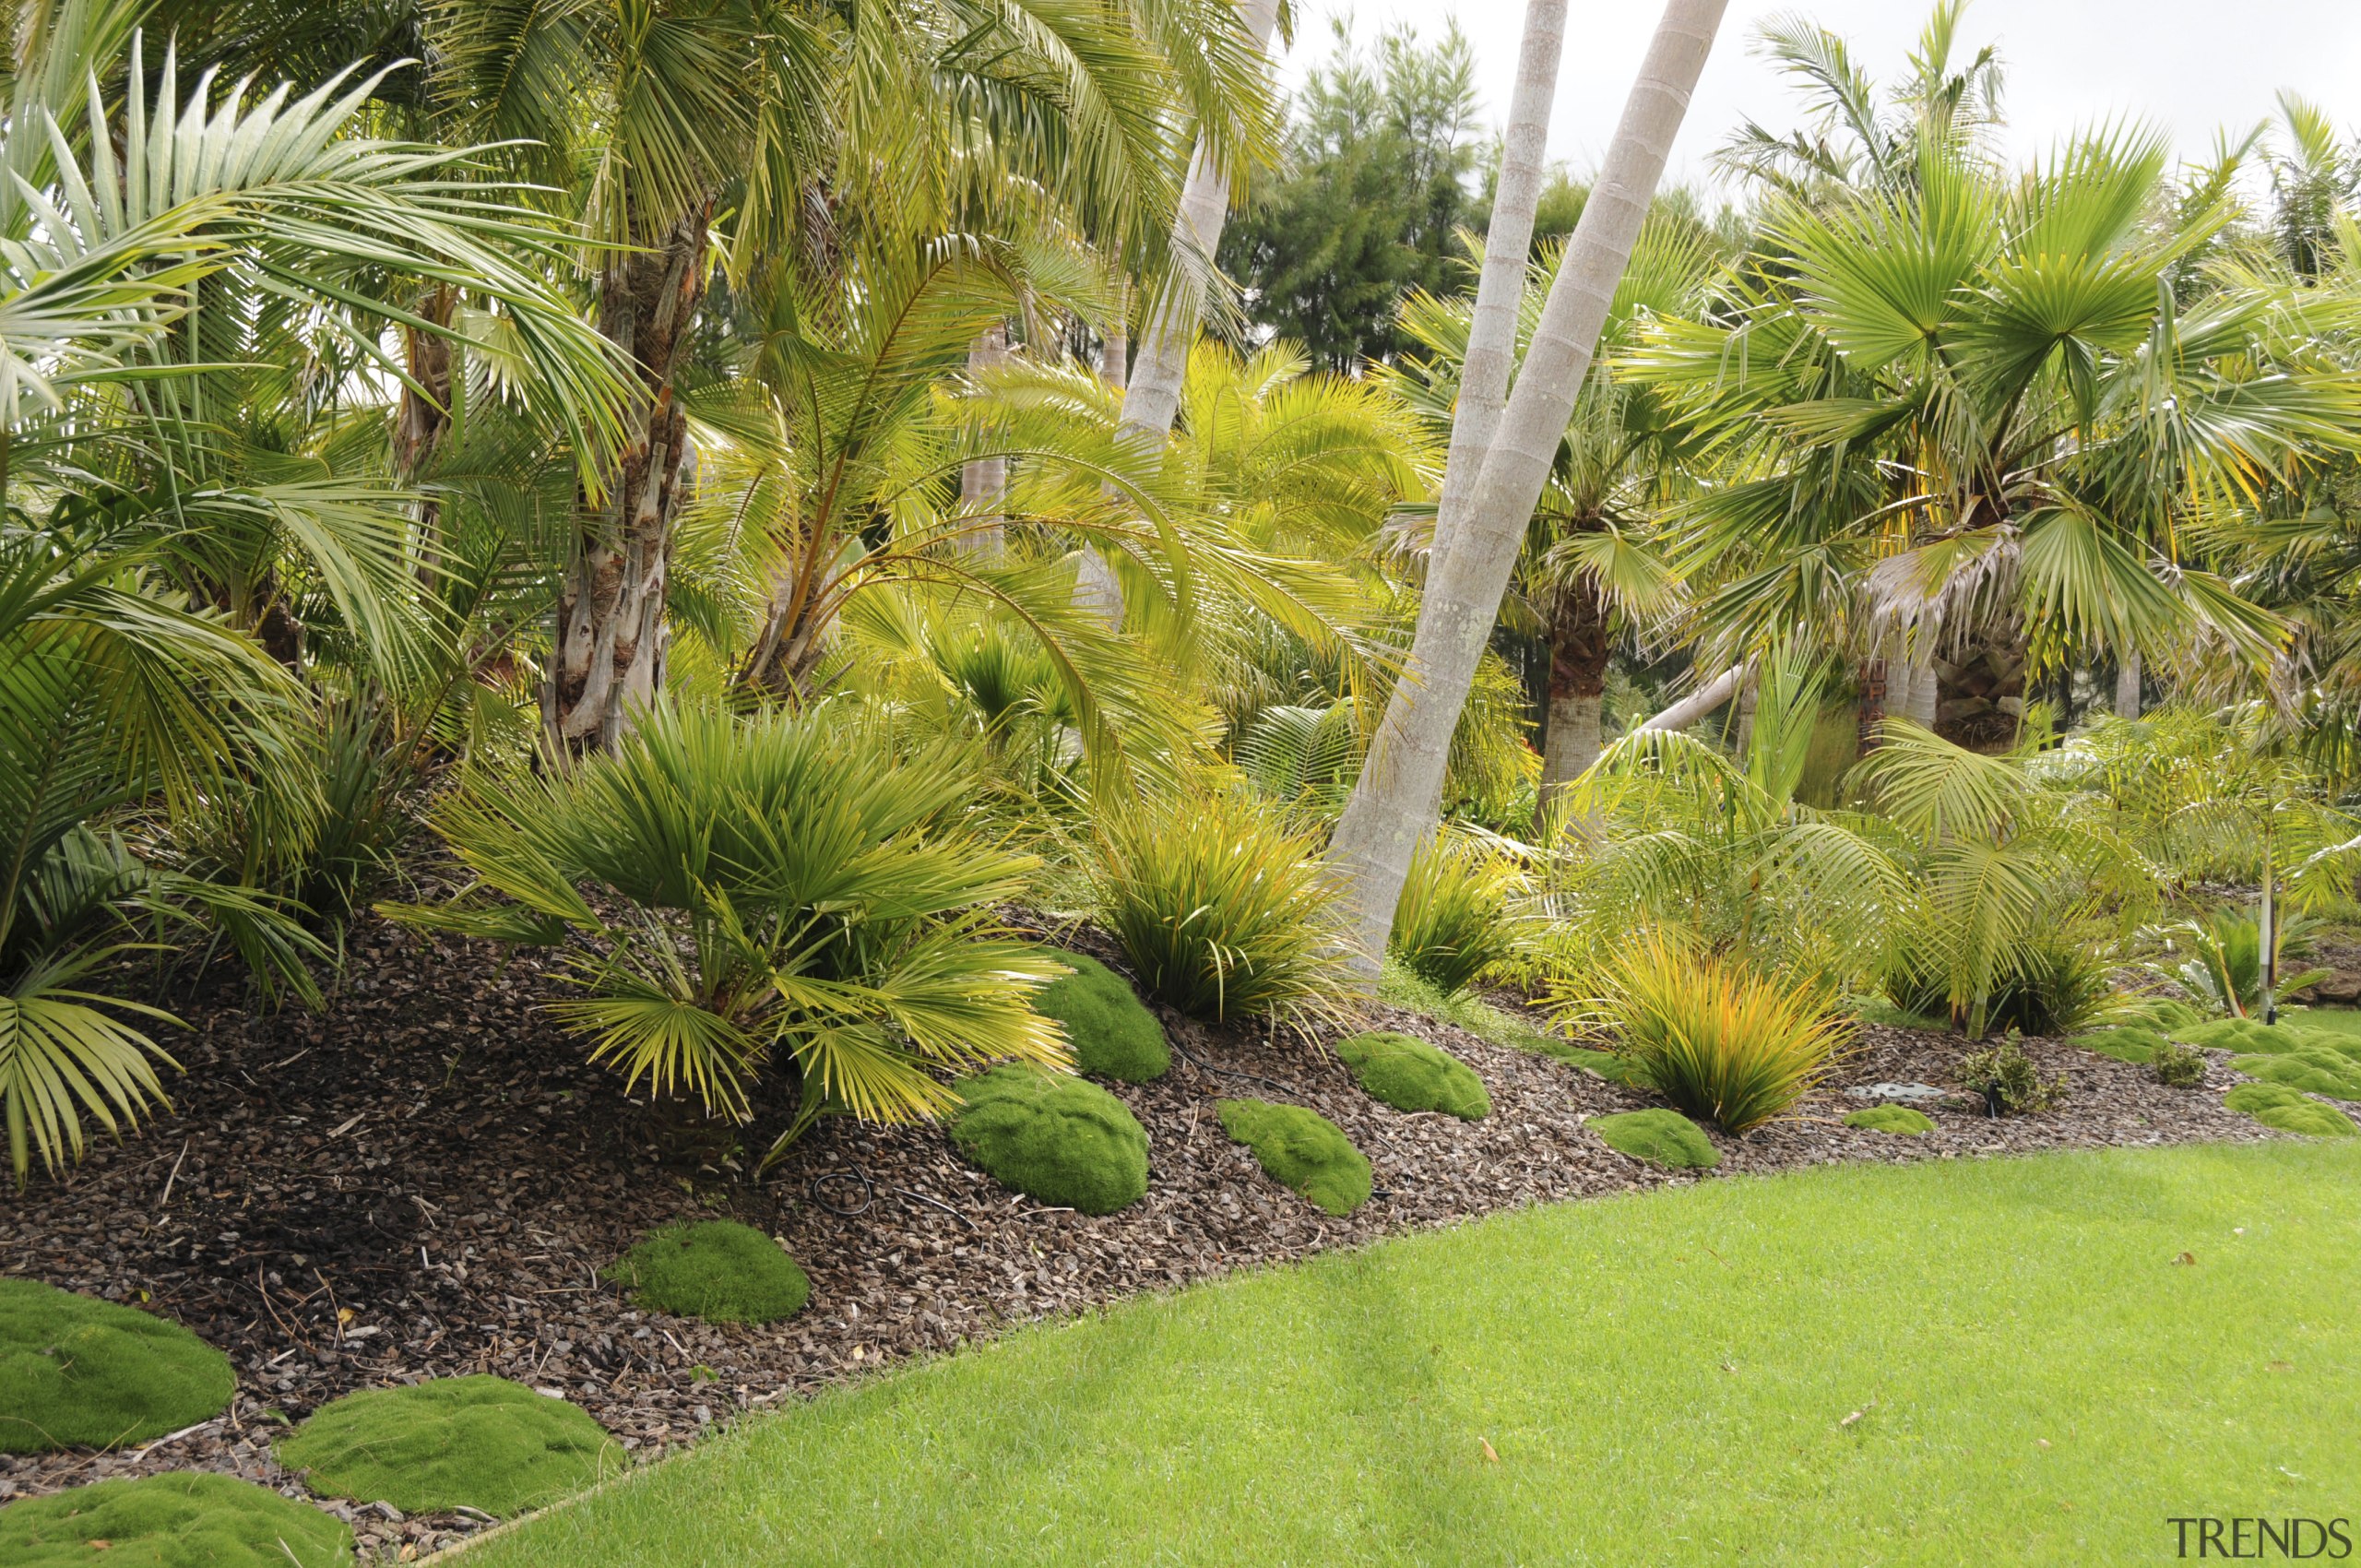 View of a designed and landscaped garden which arecales, botanical garden, ecosystem, flora, garden, grass, grass family, landscape, landscaping, lawn, palm tree, plant, tree, tropics, vegetation, yard, brown, green